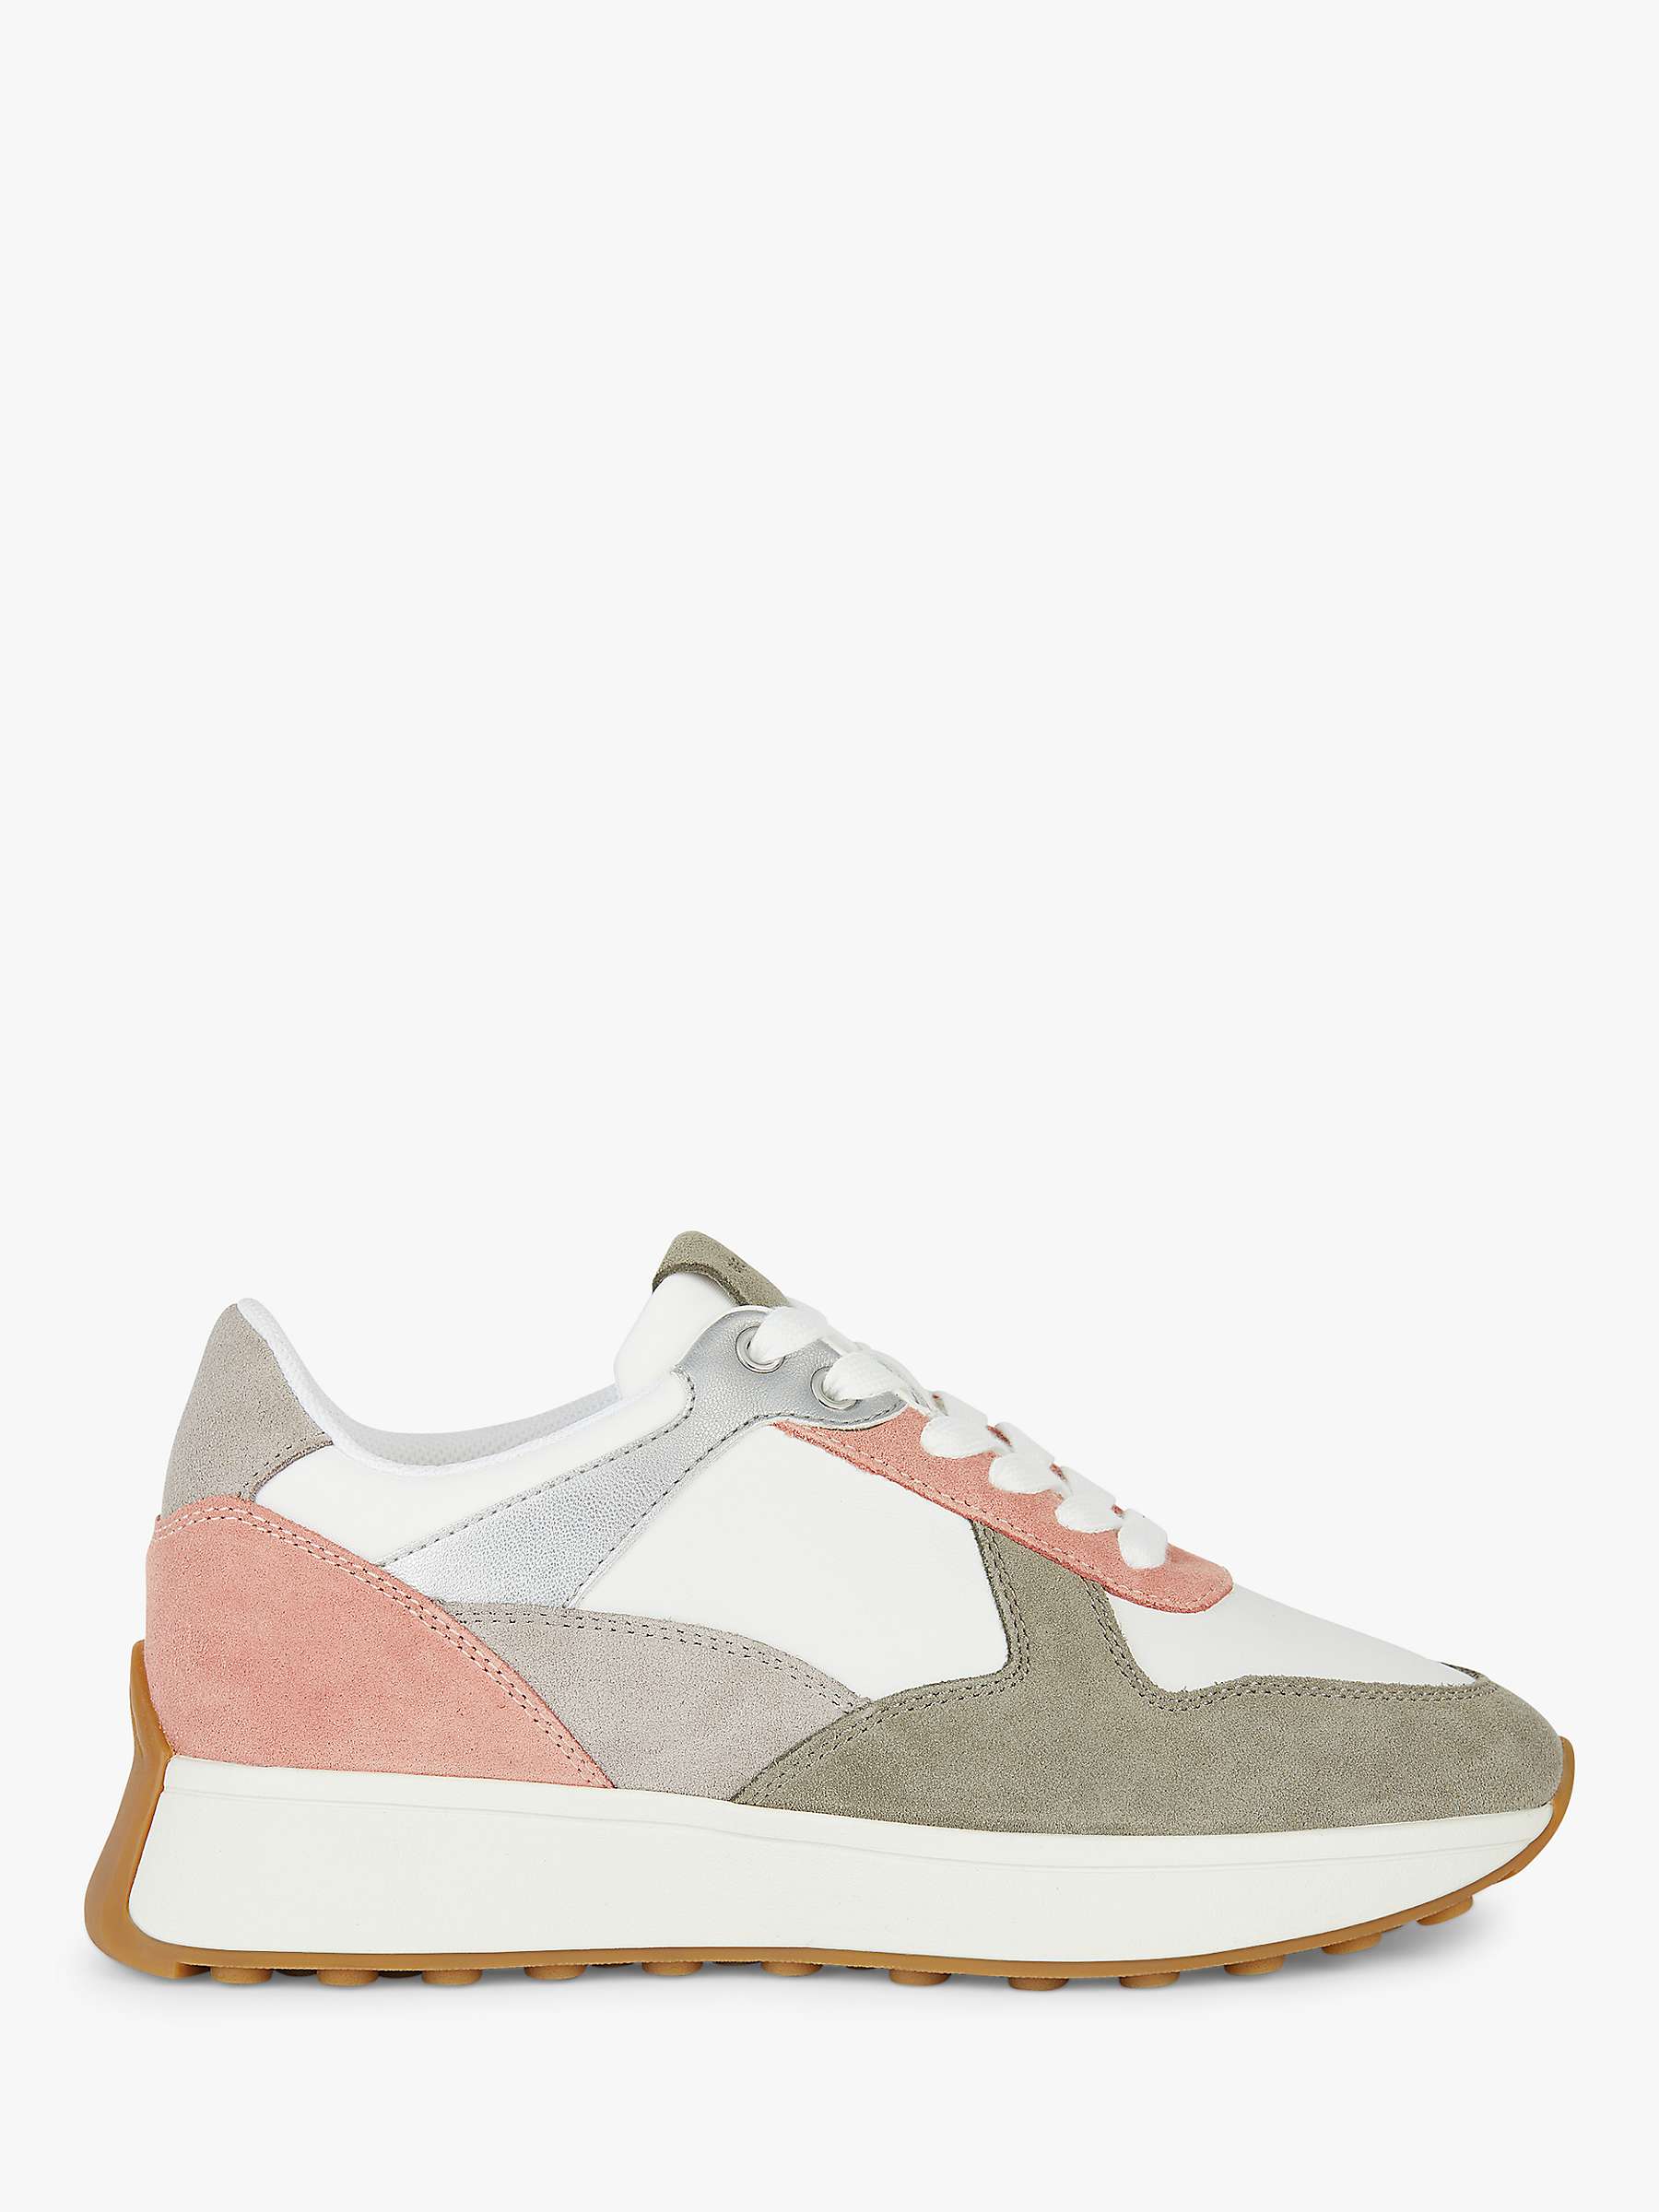 Buy Geox Amabel Retro Lace-Up Trainers, White/Multi Online at johnlewis.com